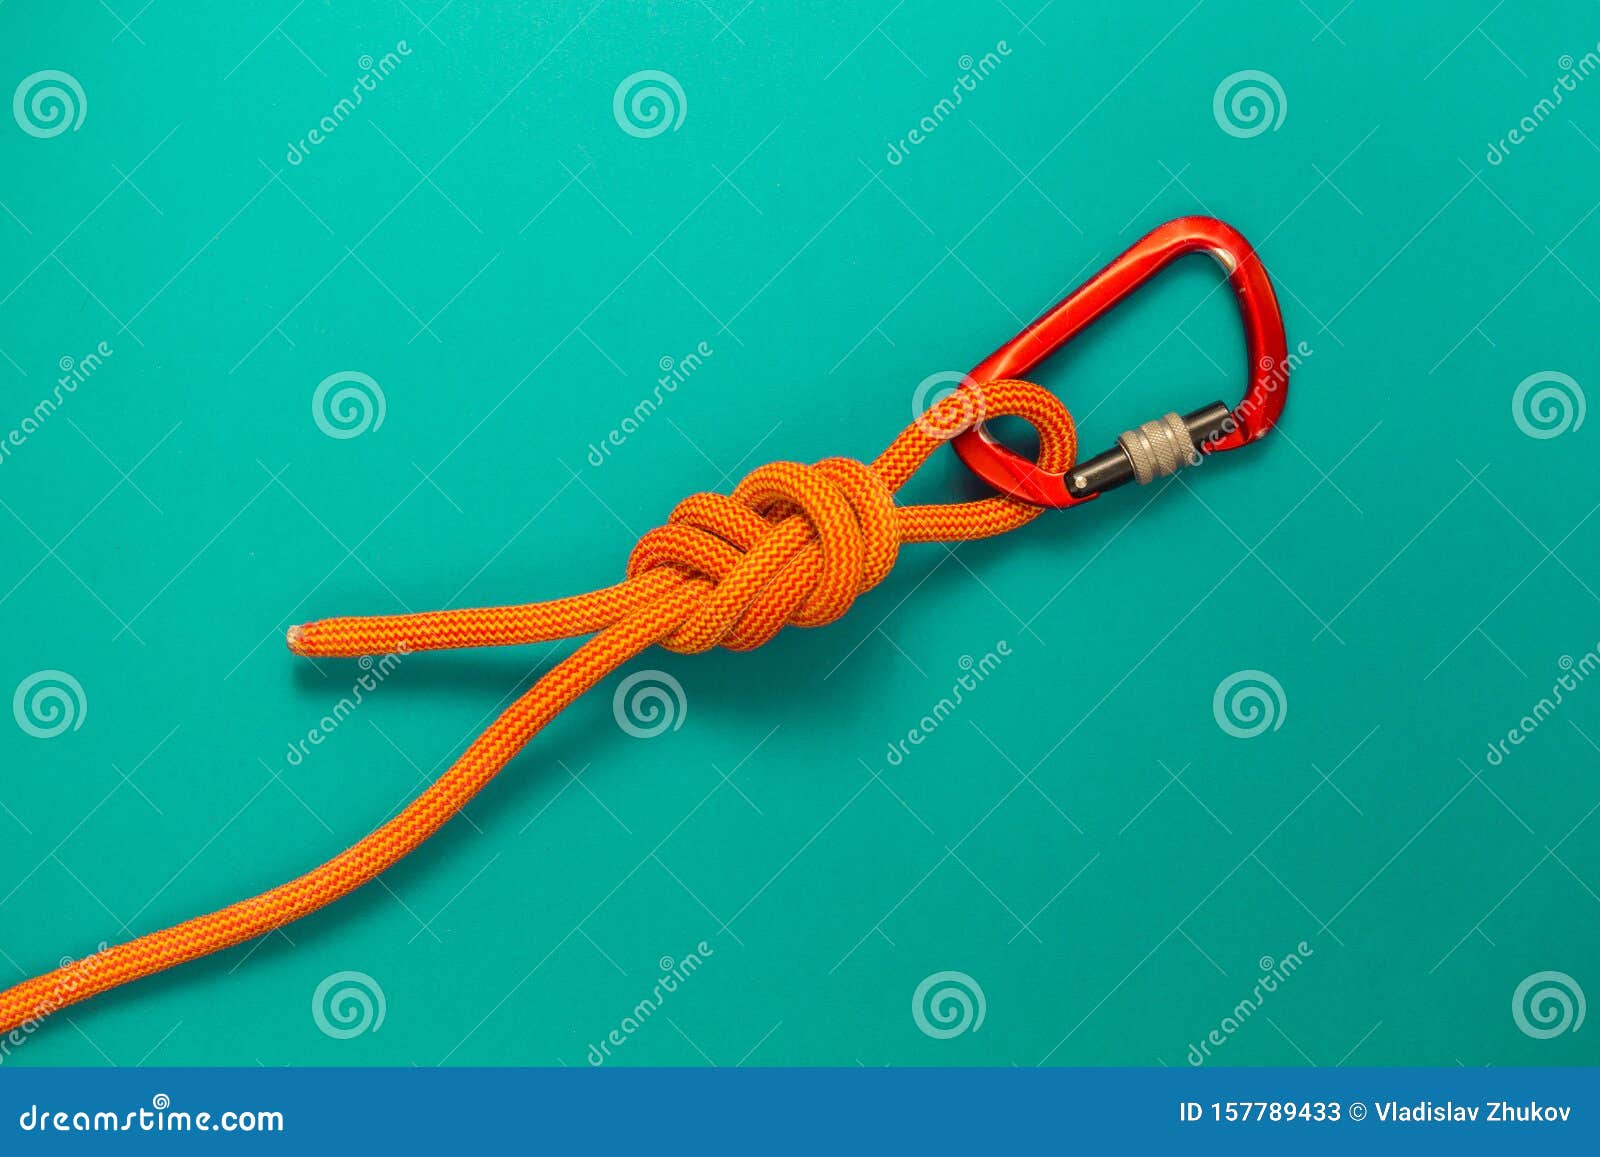 https://thumbs.dreamstime.com/z/carabiner-knot-climbing-rope-carabiner-knot-climbing-rope-equipment-climbing-mountaineering-knot-157789433.jpg